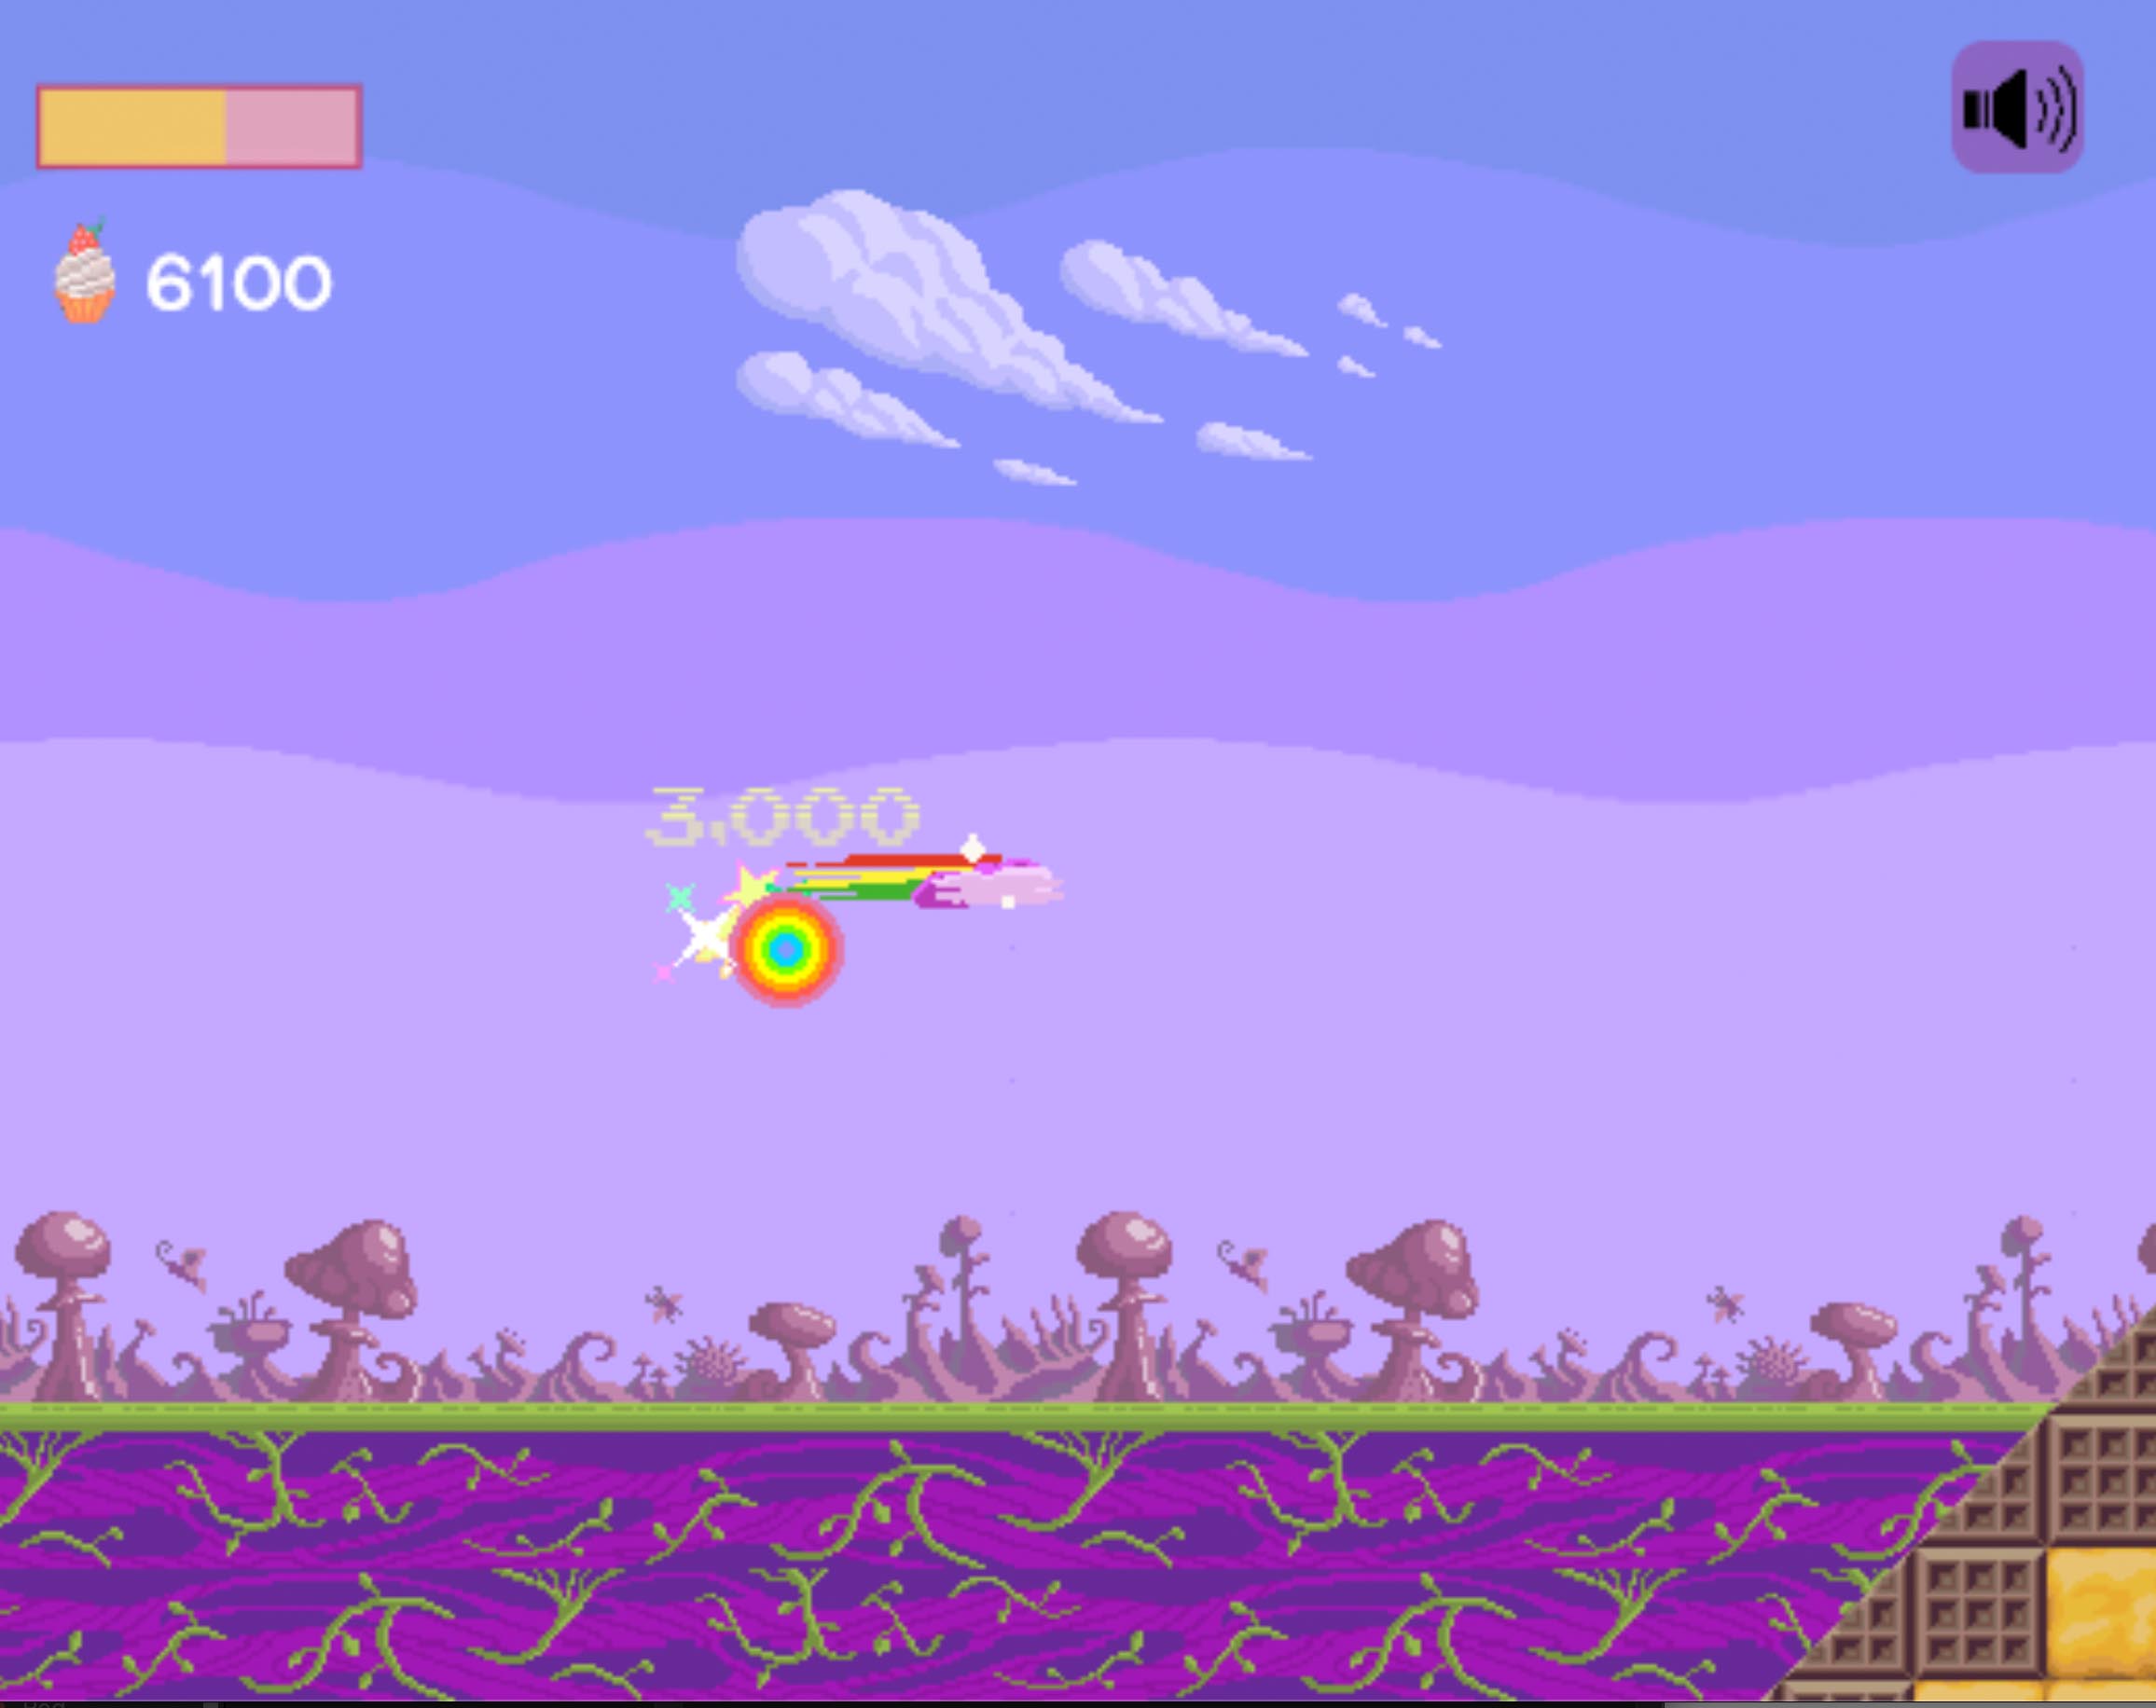 This is a screenshot from Idiom Unicorn. The player is flying through the air in rainbow mode and has just collected a treat.